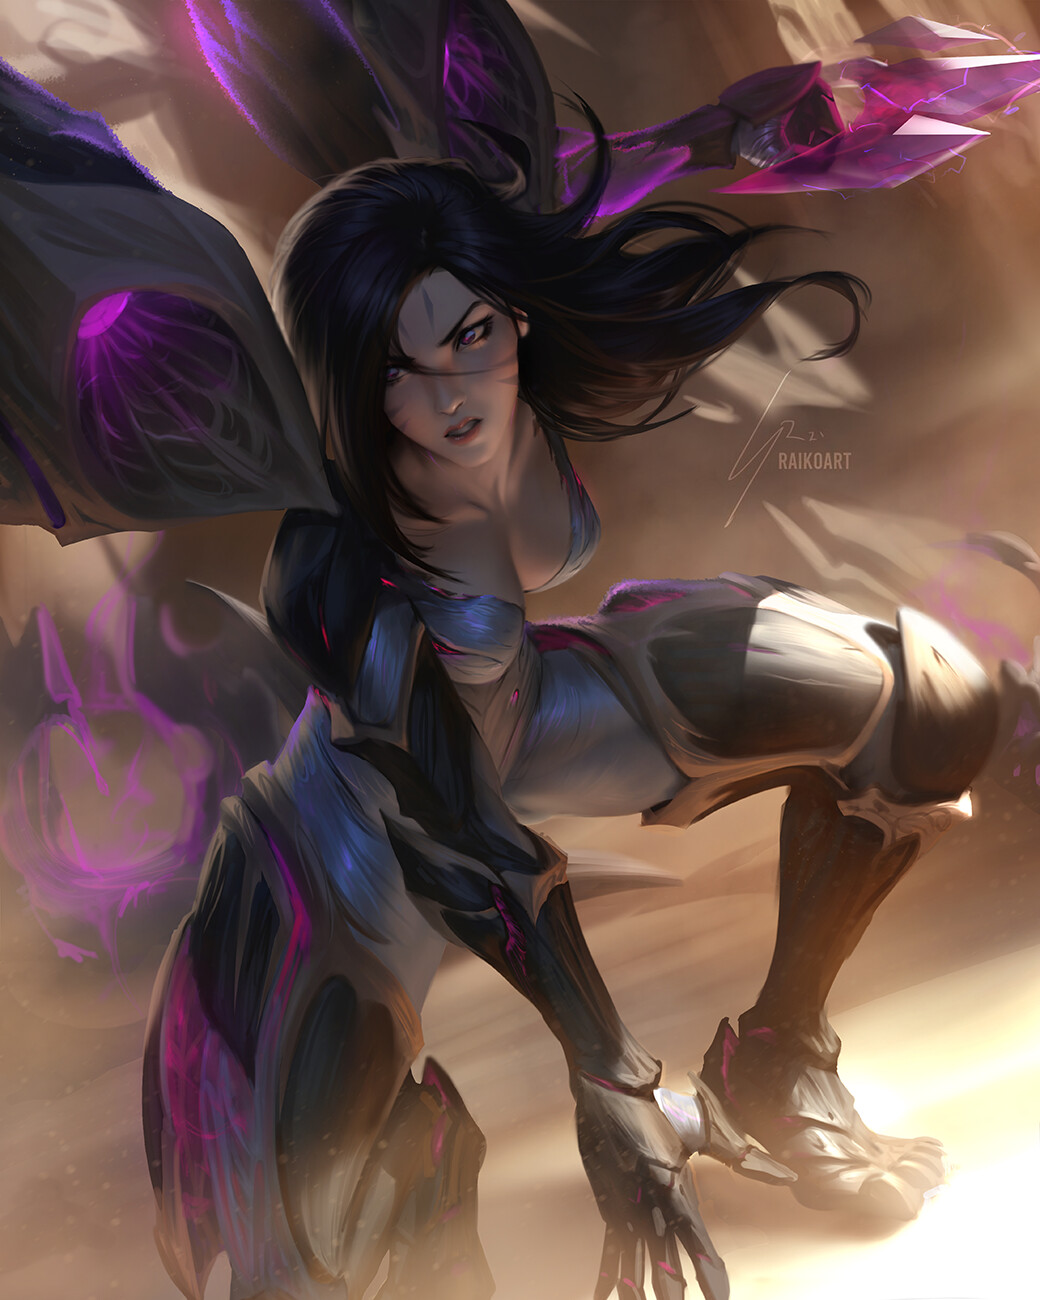 General 1040x1300 Sean Tay drawing League of Legends Kai'Sa (League of Legends) dark hair warrior looking away face paint wings fighting purple bodysuit tight clothing cleavage